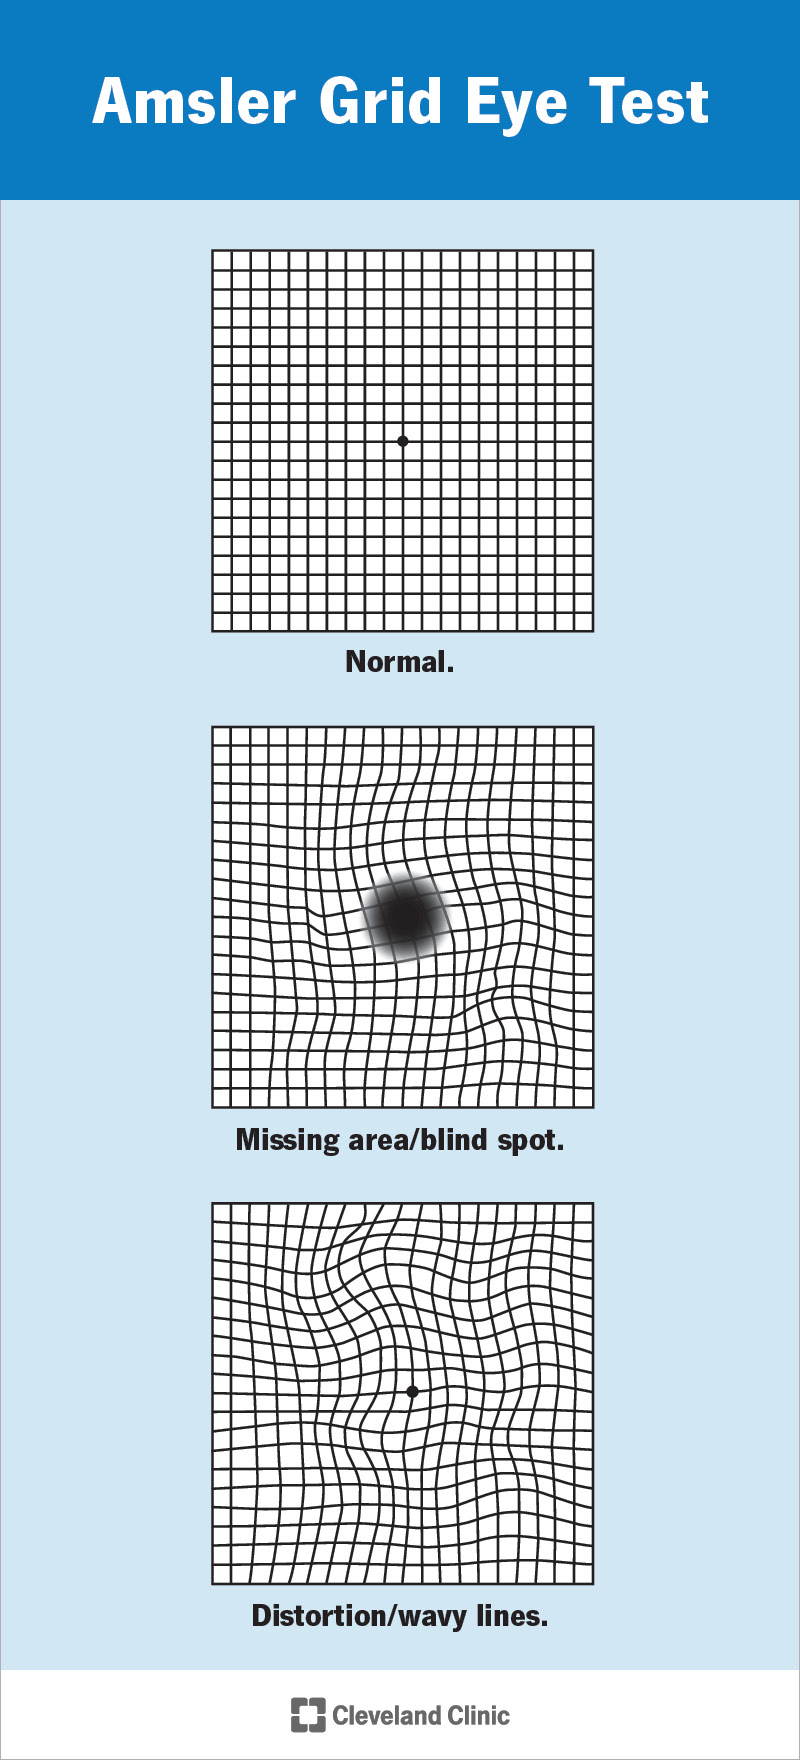 https://my.clevelandclinic.org/-/scassets/images/org/health/articles/amsler-grid-eye-test